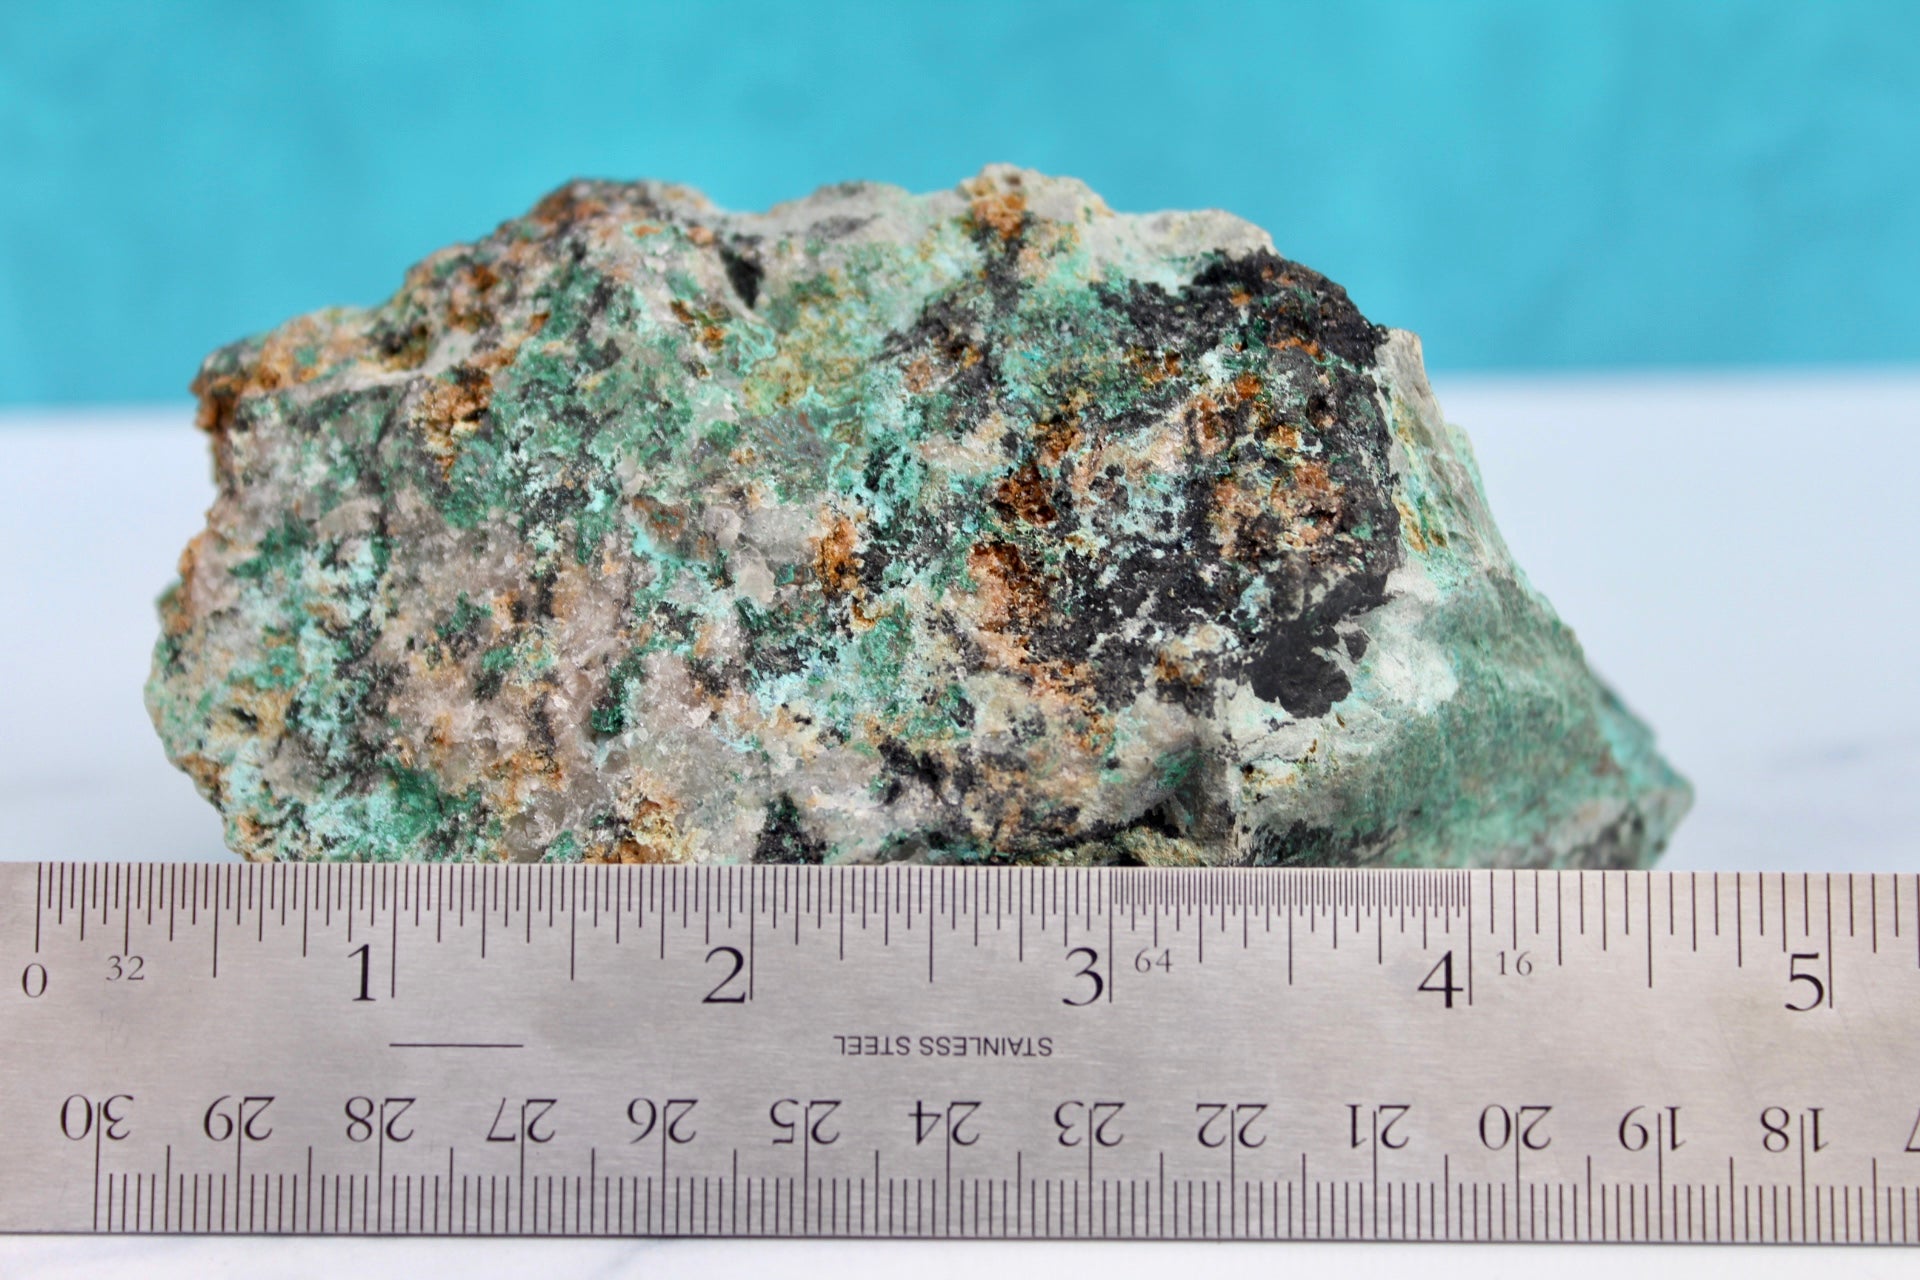 ruler size dimensions of rock chrysocolla